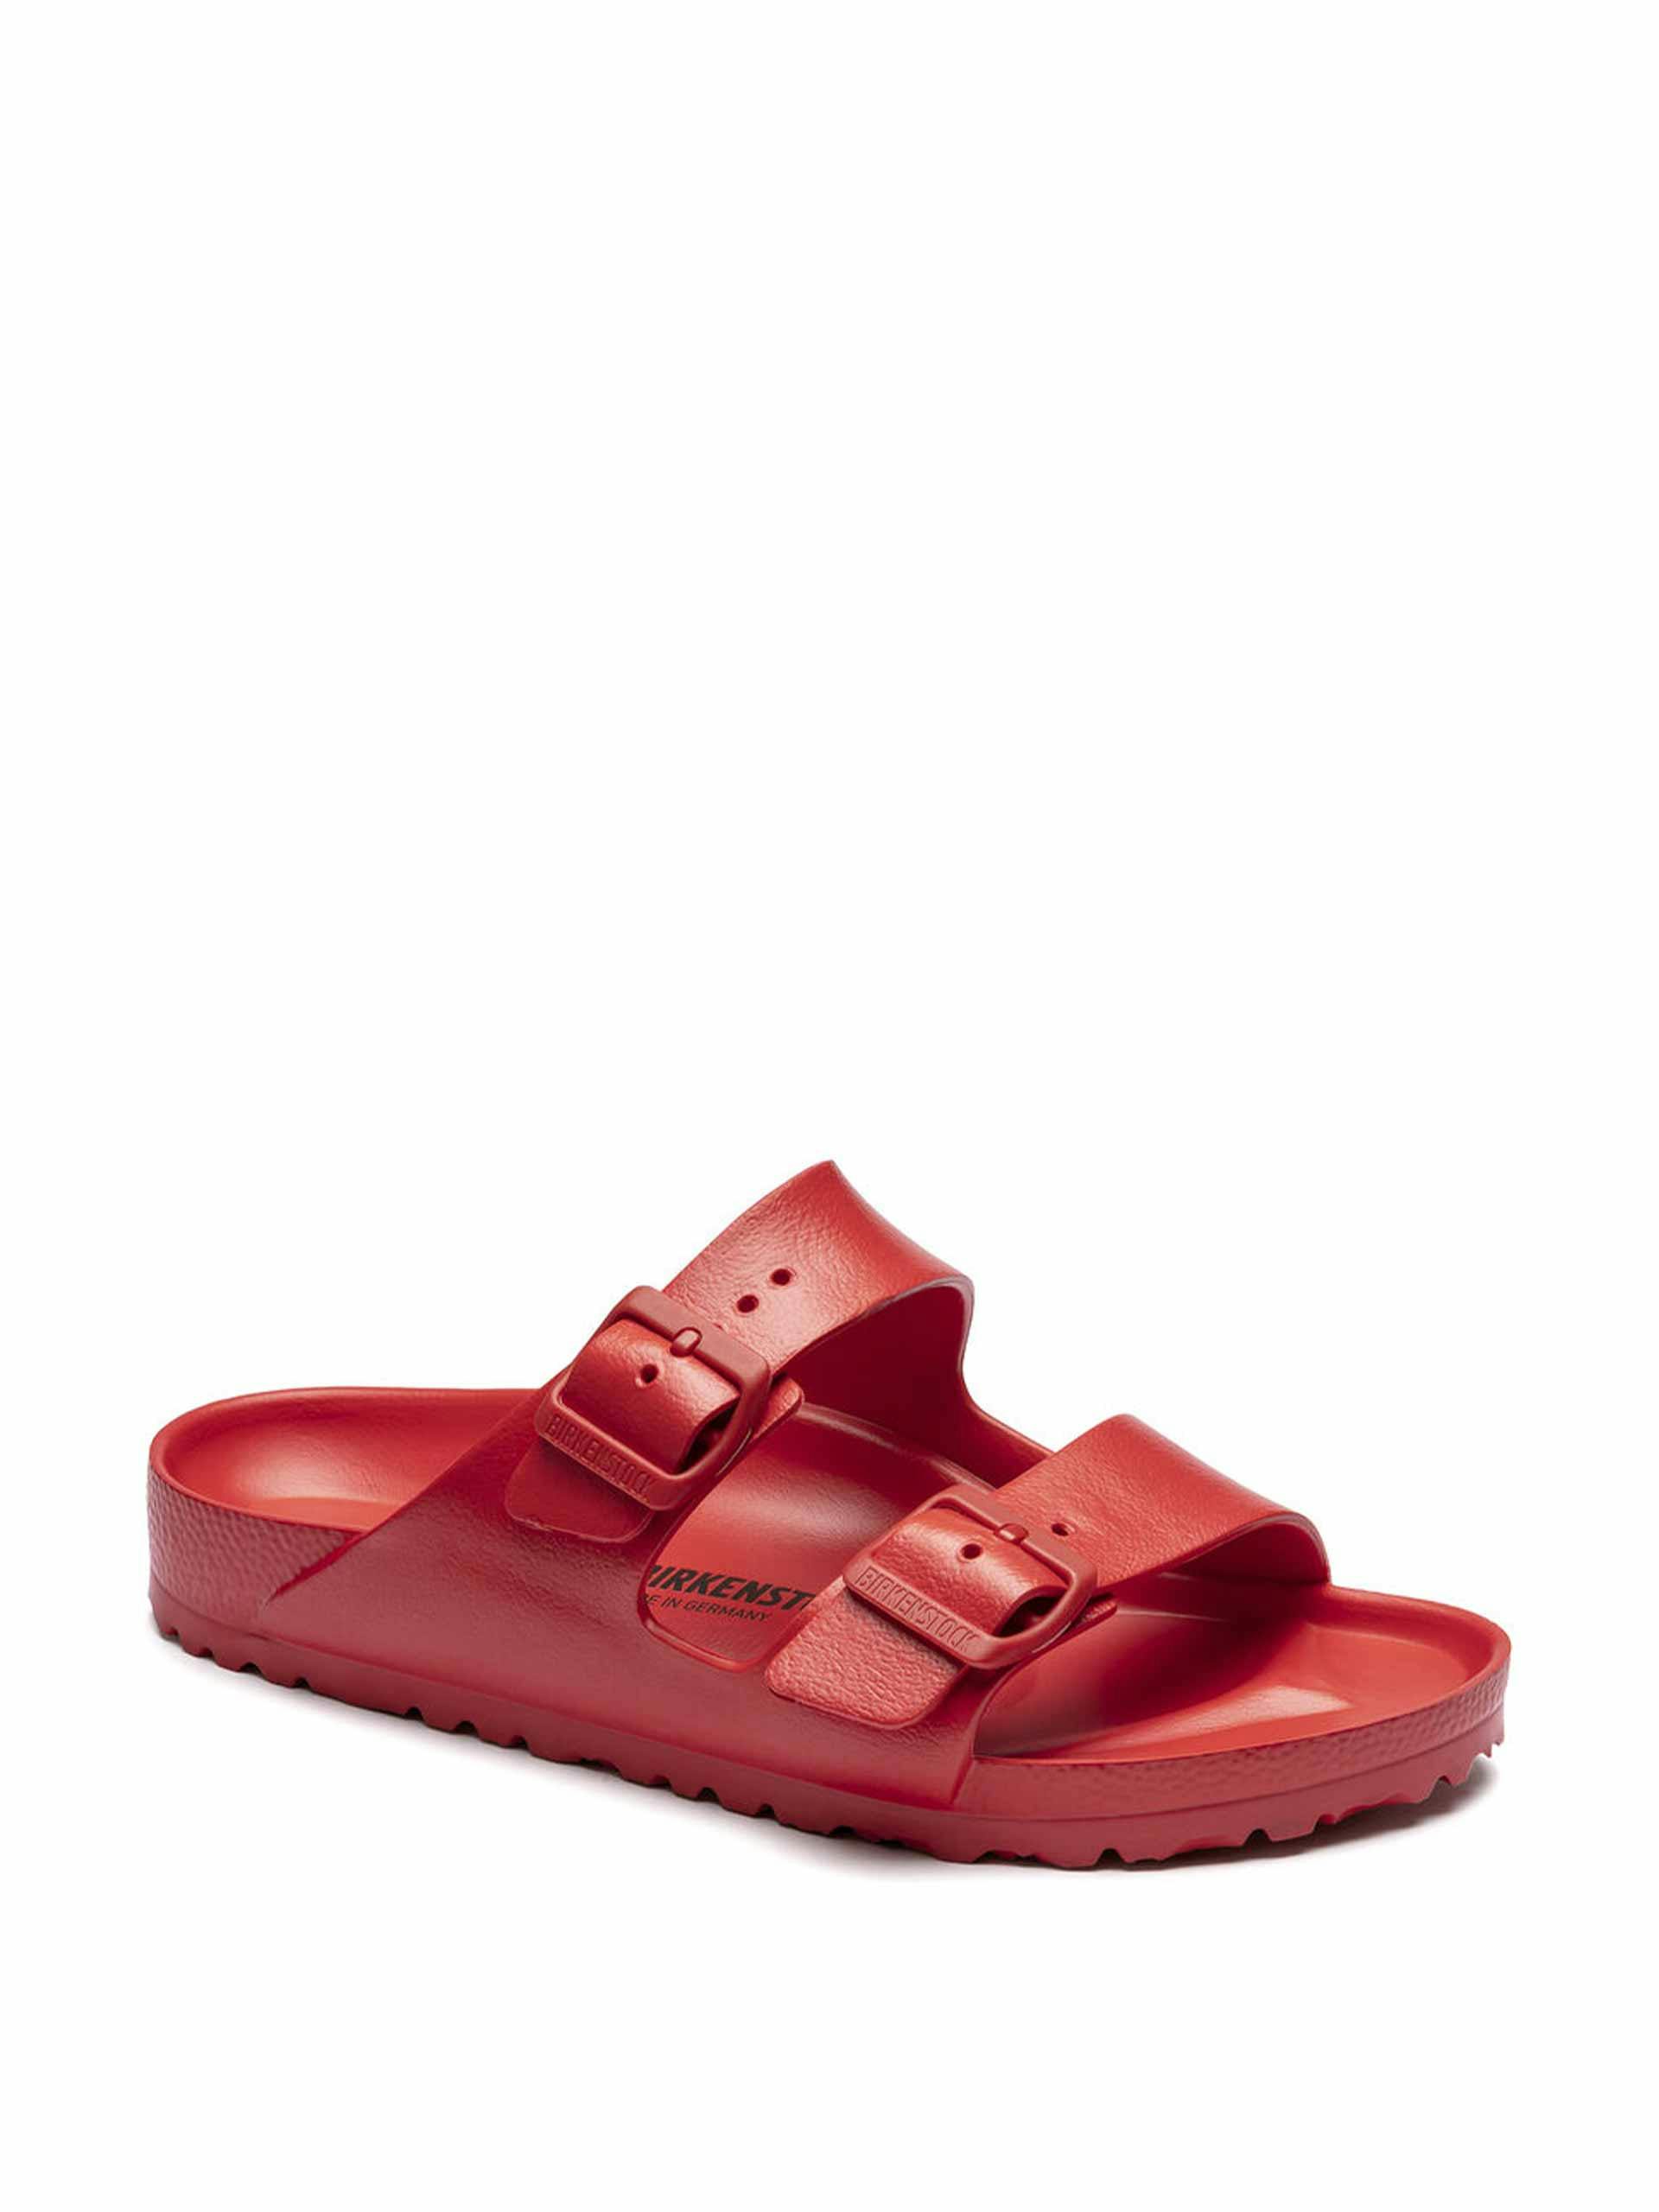 Red sandals